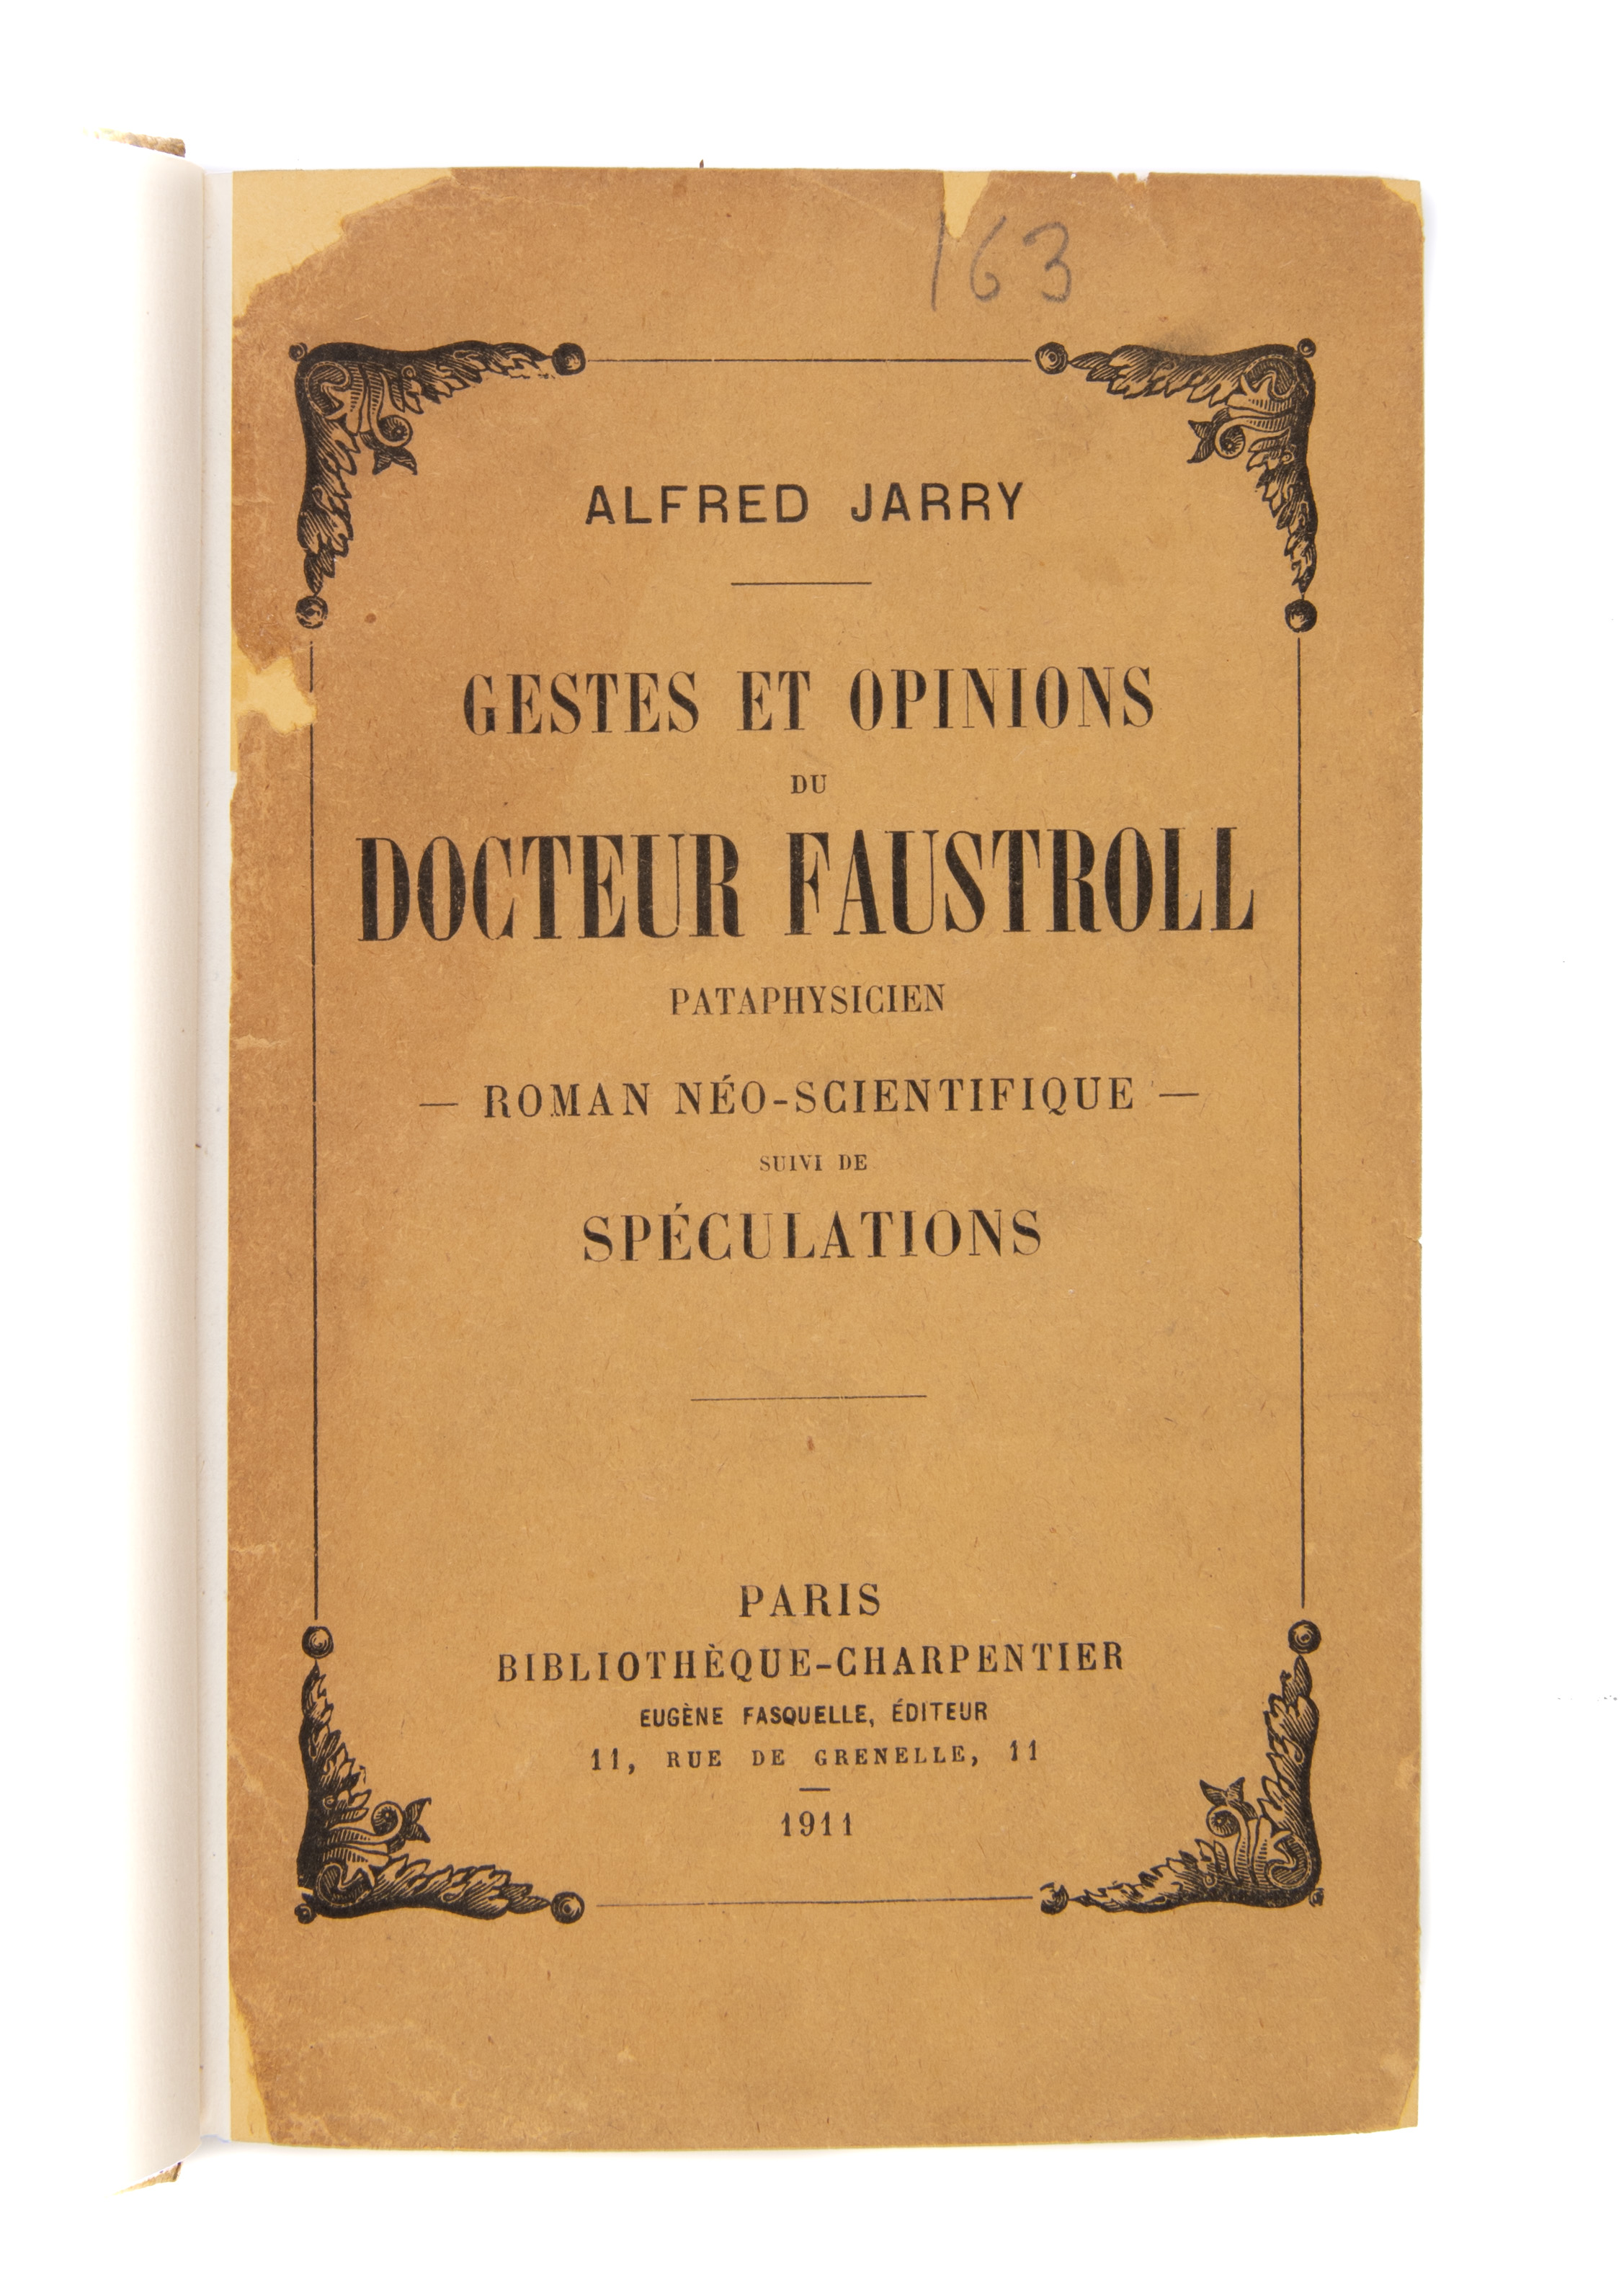 Gestes Et Opinions Du Docteur Faustroll Pataphysicien Gestures And Opinions Of Doctor